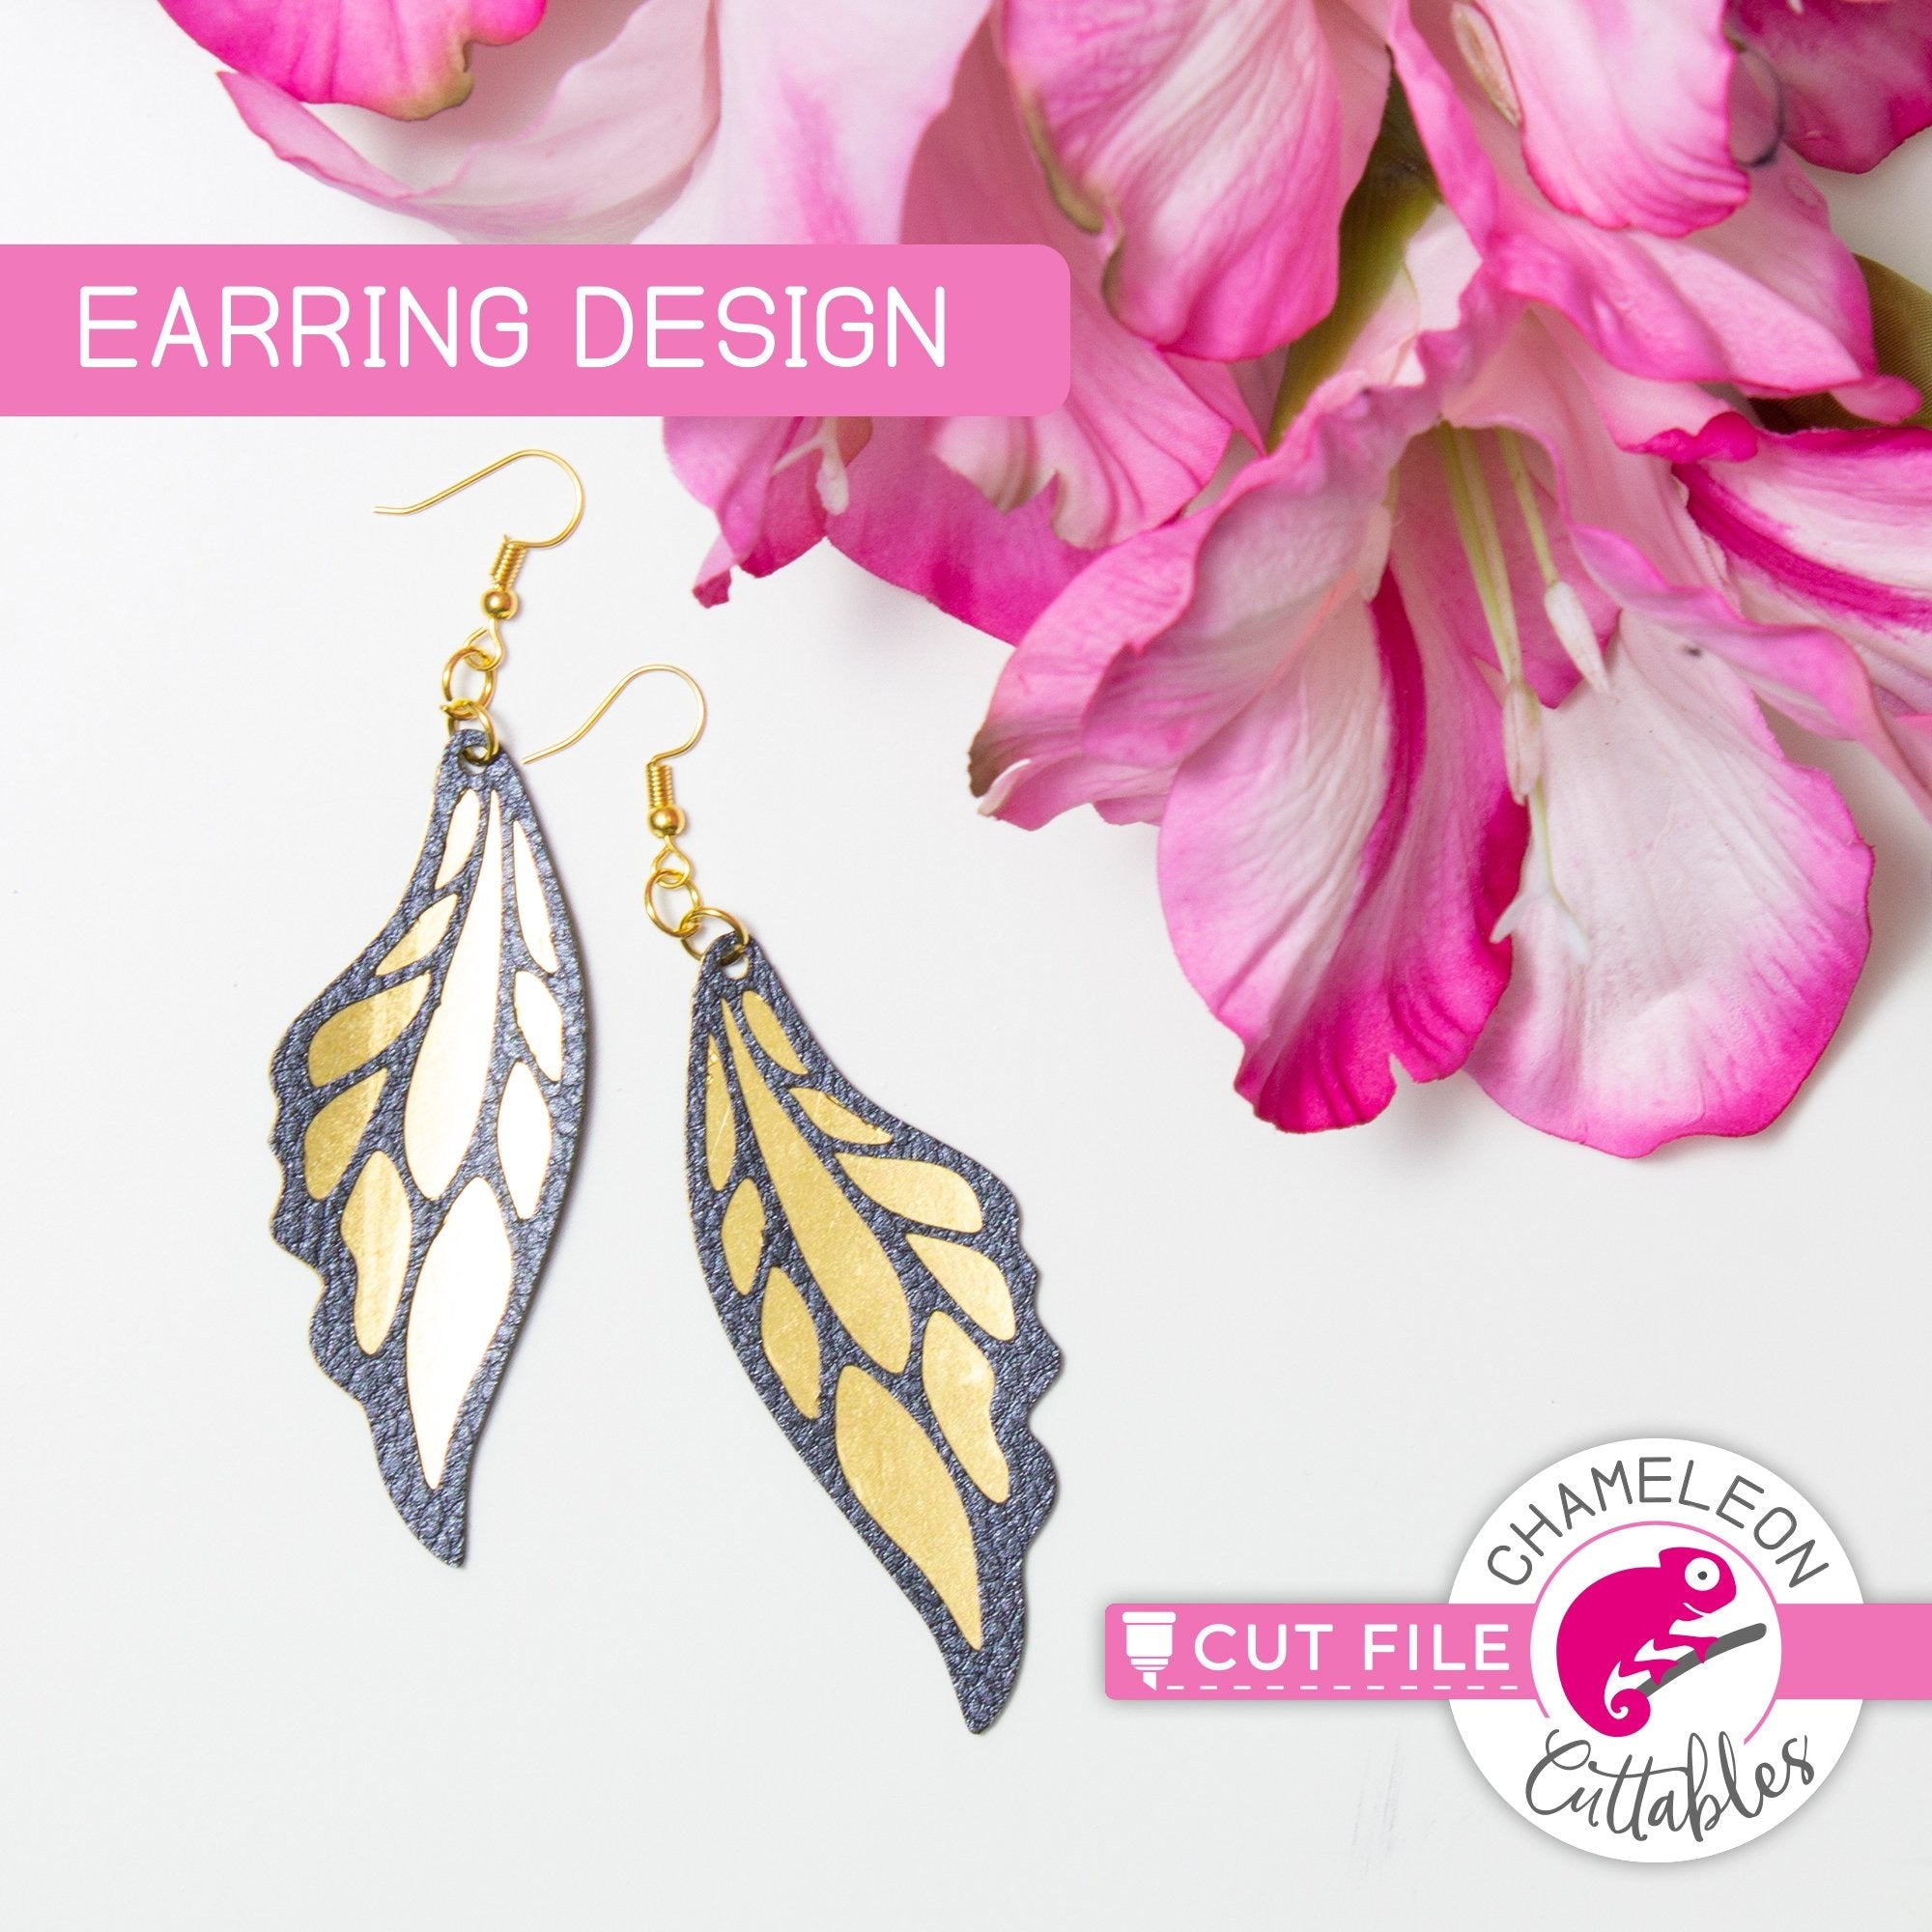 Download Butterfly Wing Inspired Earring Template Svg Png Dxf Eps Jpeg Chameleon Cuttables Llc Chameleon Cuttables Llc